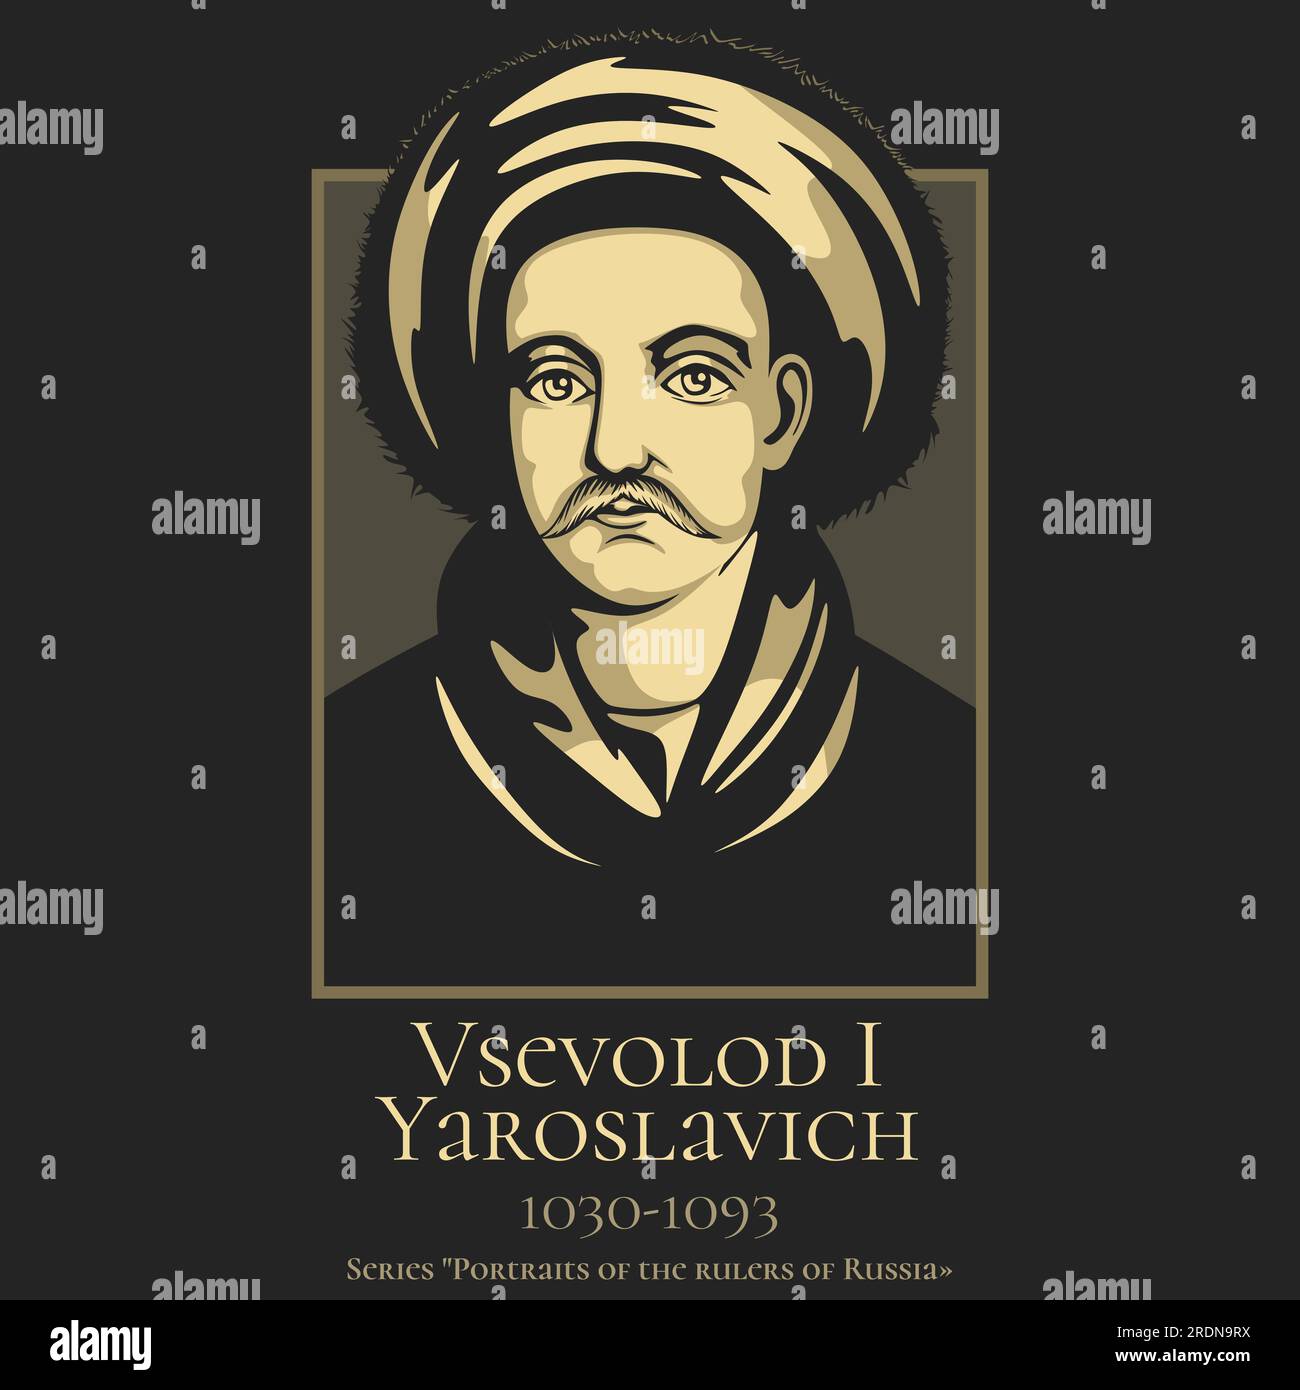 Portrait of the rulers of Russia. Vsevolod I Yaroslavich (1030-1093) ruled as Grand Prince of Kiev from 1078 until his death. Stock Vector